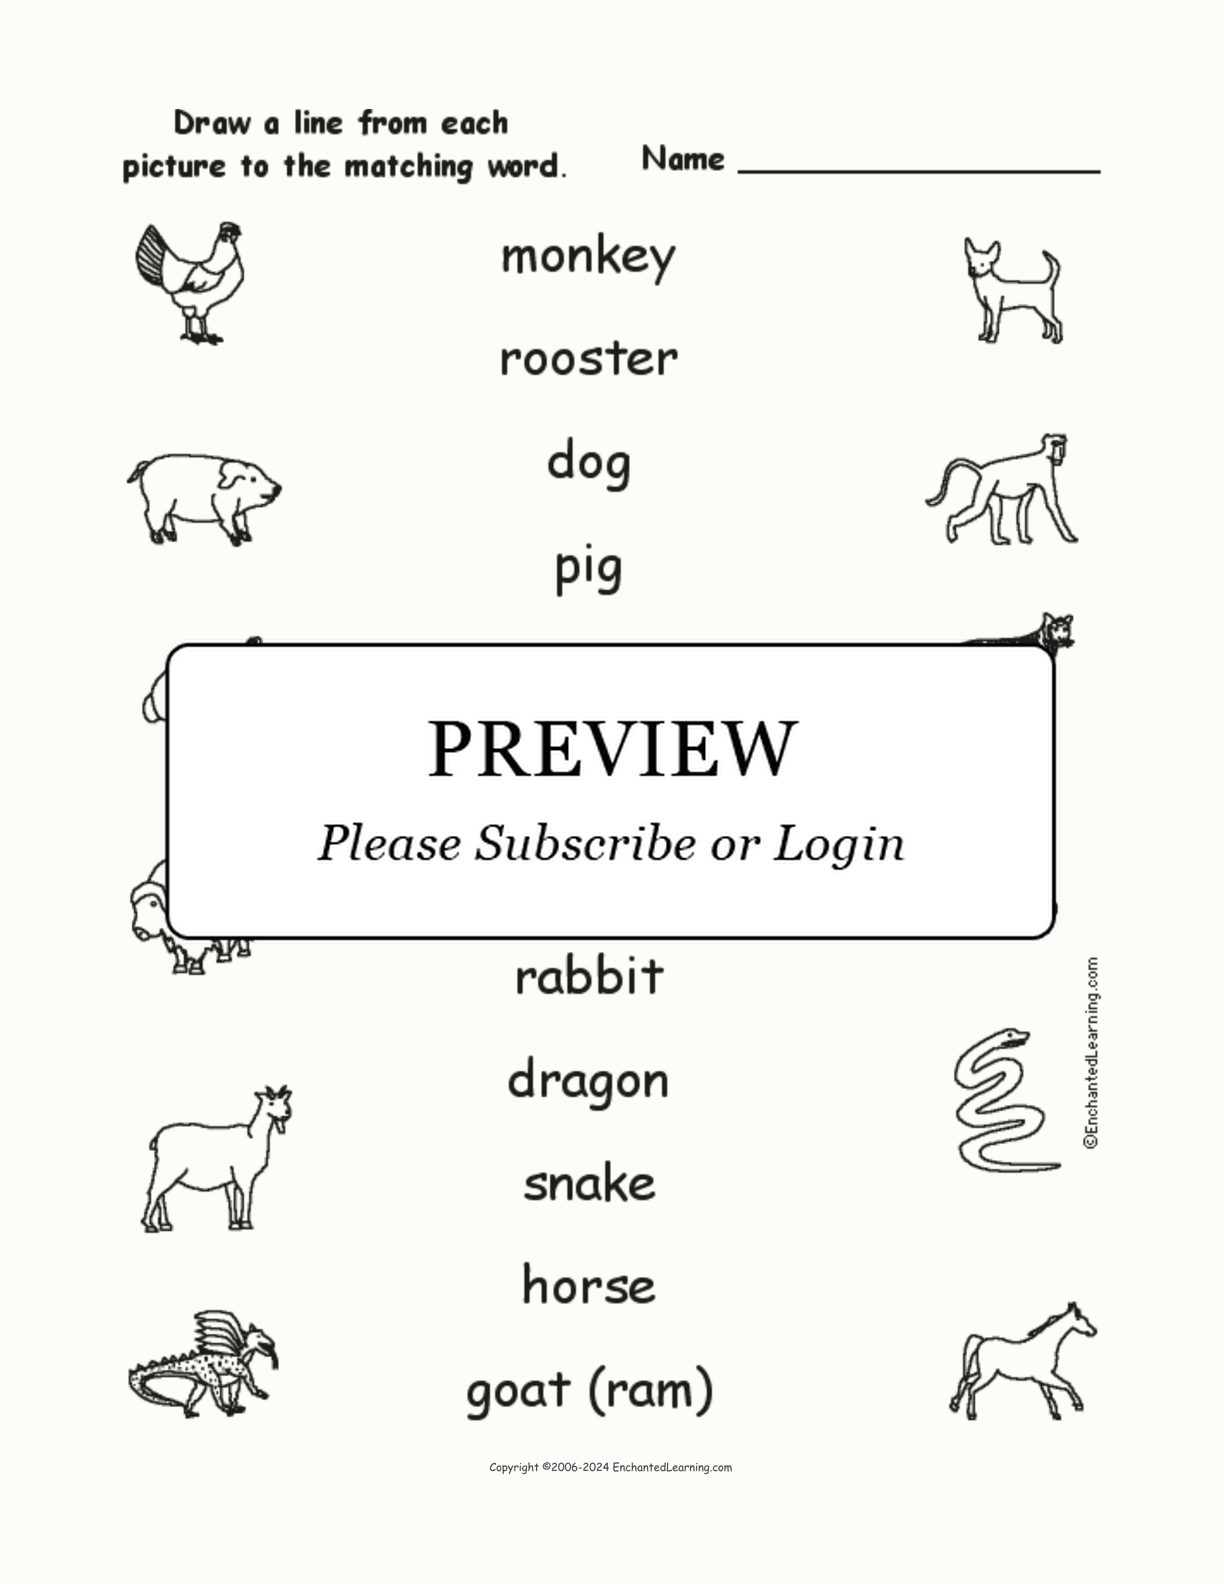 Chinese Zodiac - Match the Words to the Pictures interactive worksheet page 1